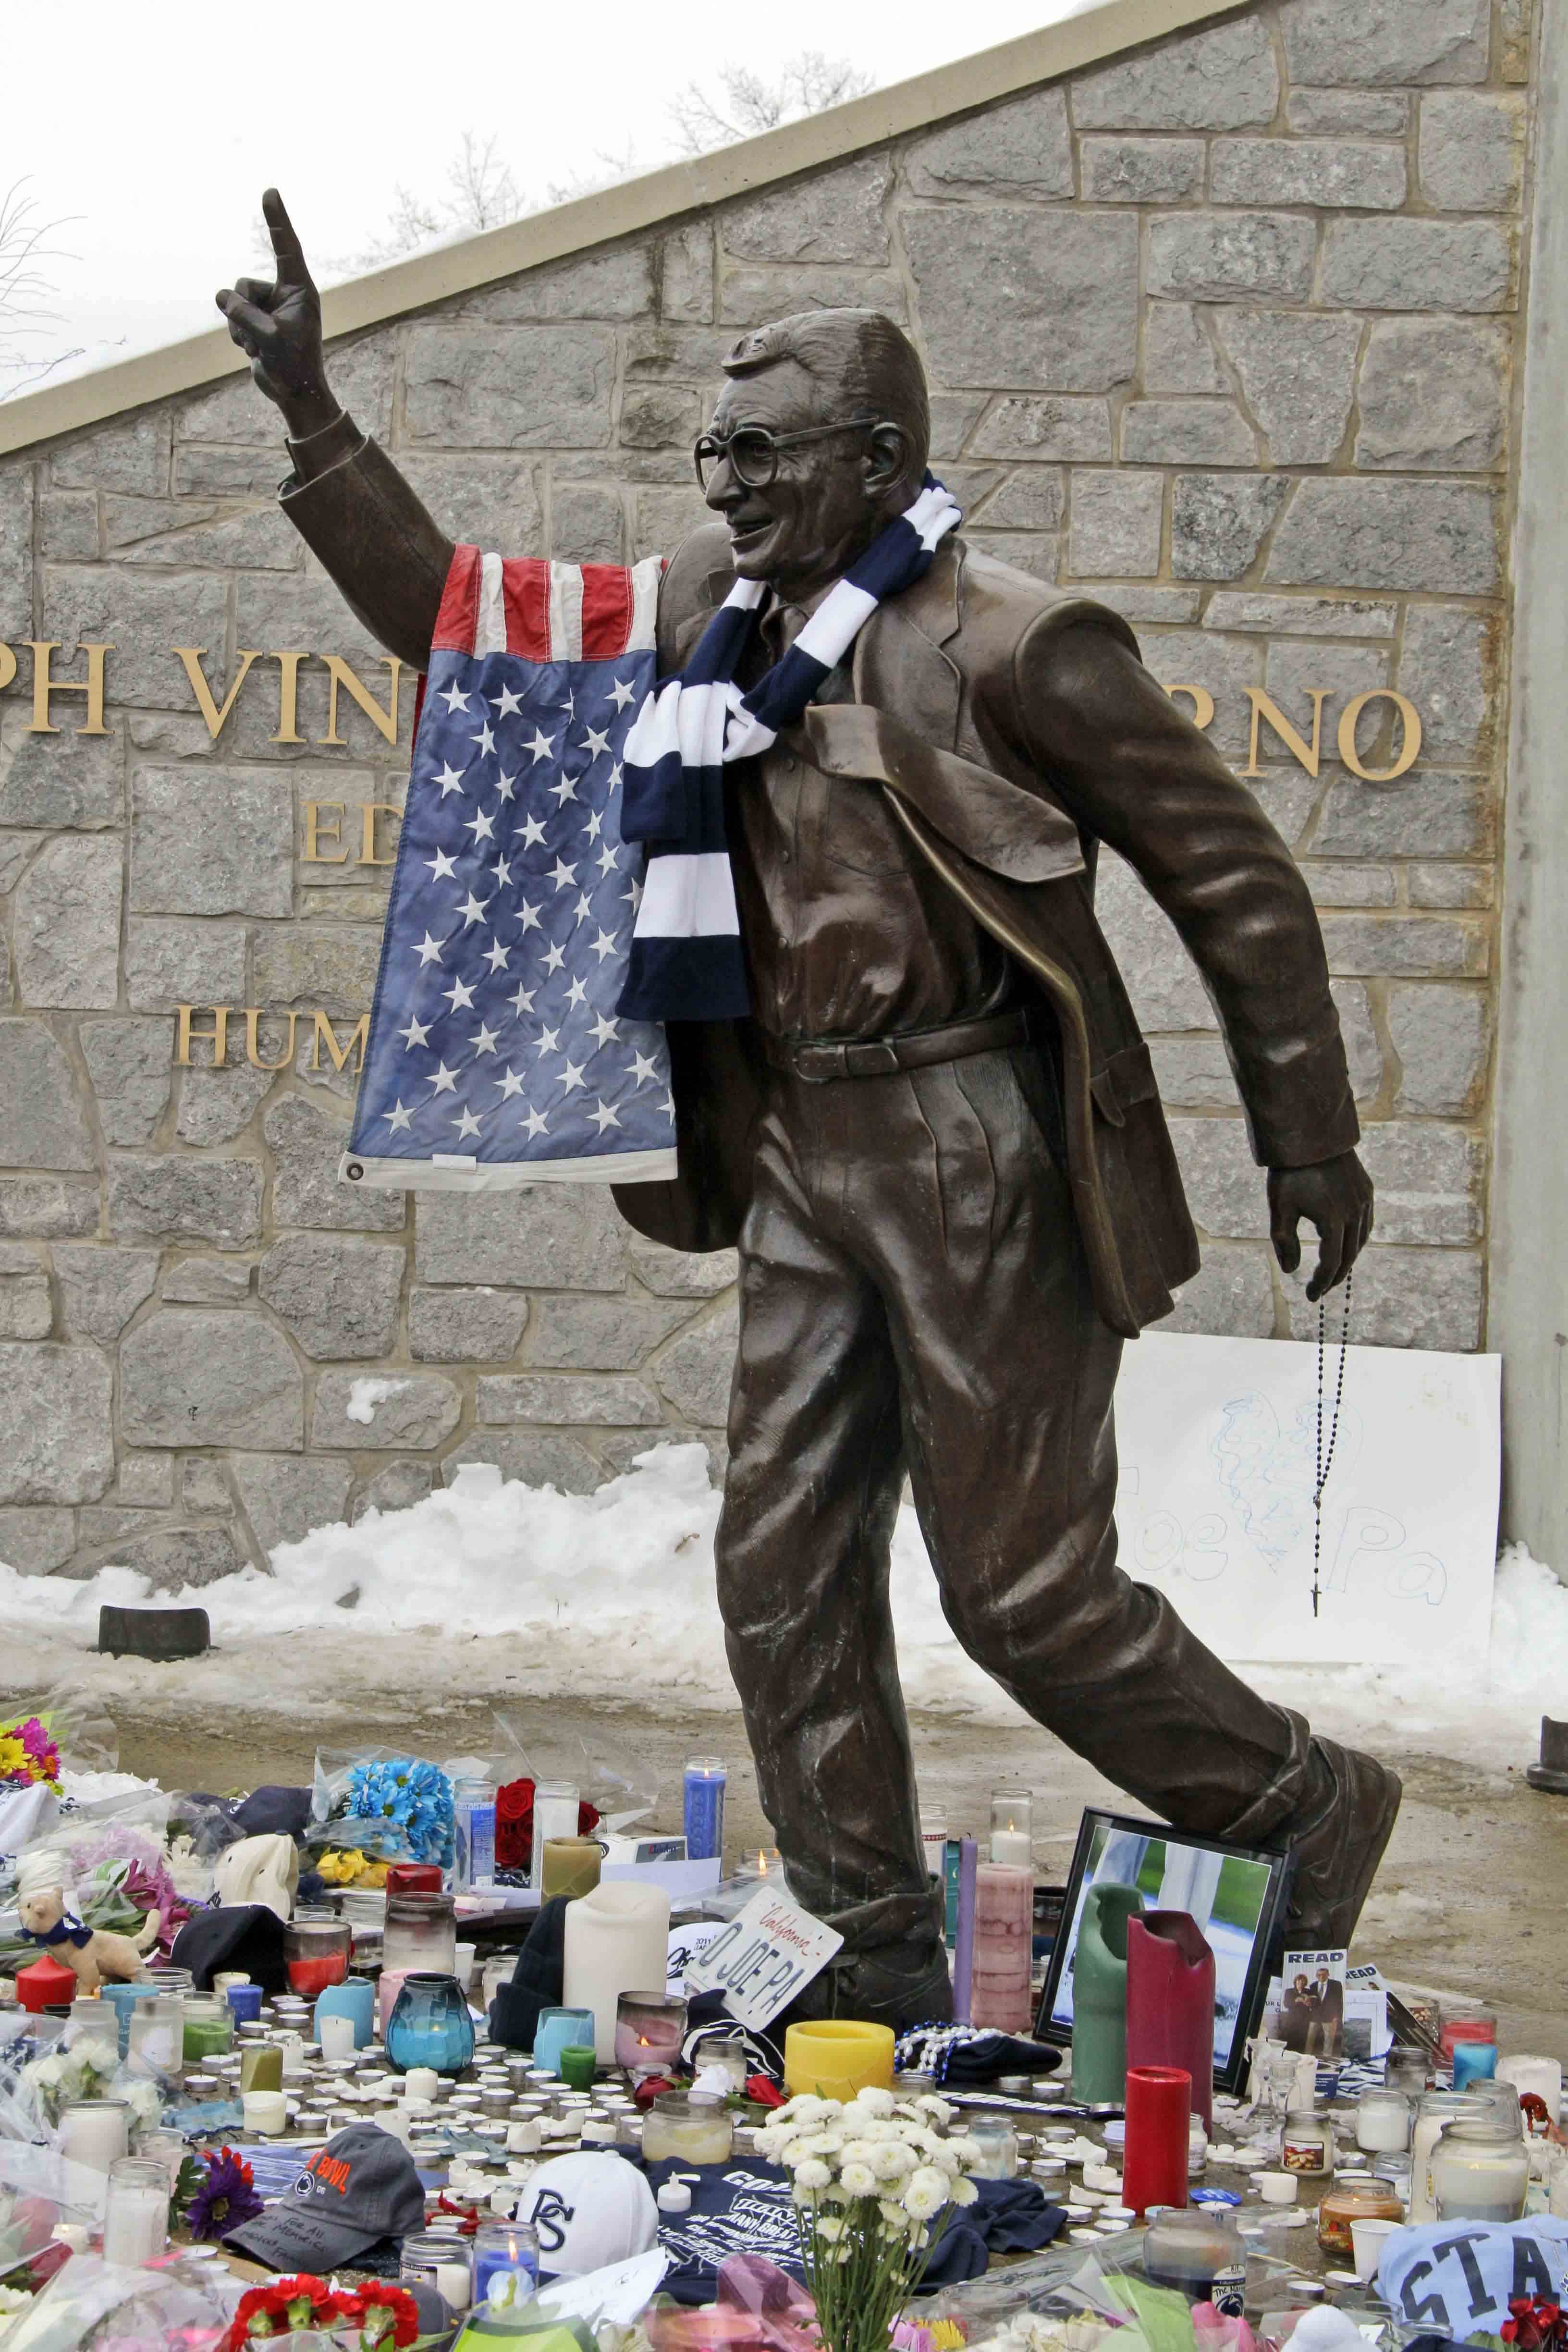 A flag and Penn State scarf were placed on a statue of Joe Paterno outside Beaver Stadium on the Penn State University campus by fans paying their respects after learning of his death Sunday, Jan. 22, 2012 in State College,Pa.. (AP Photo/Gene J. Puskar)